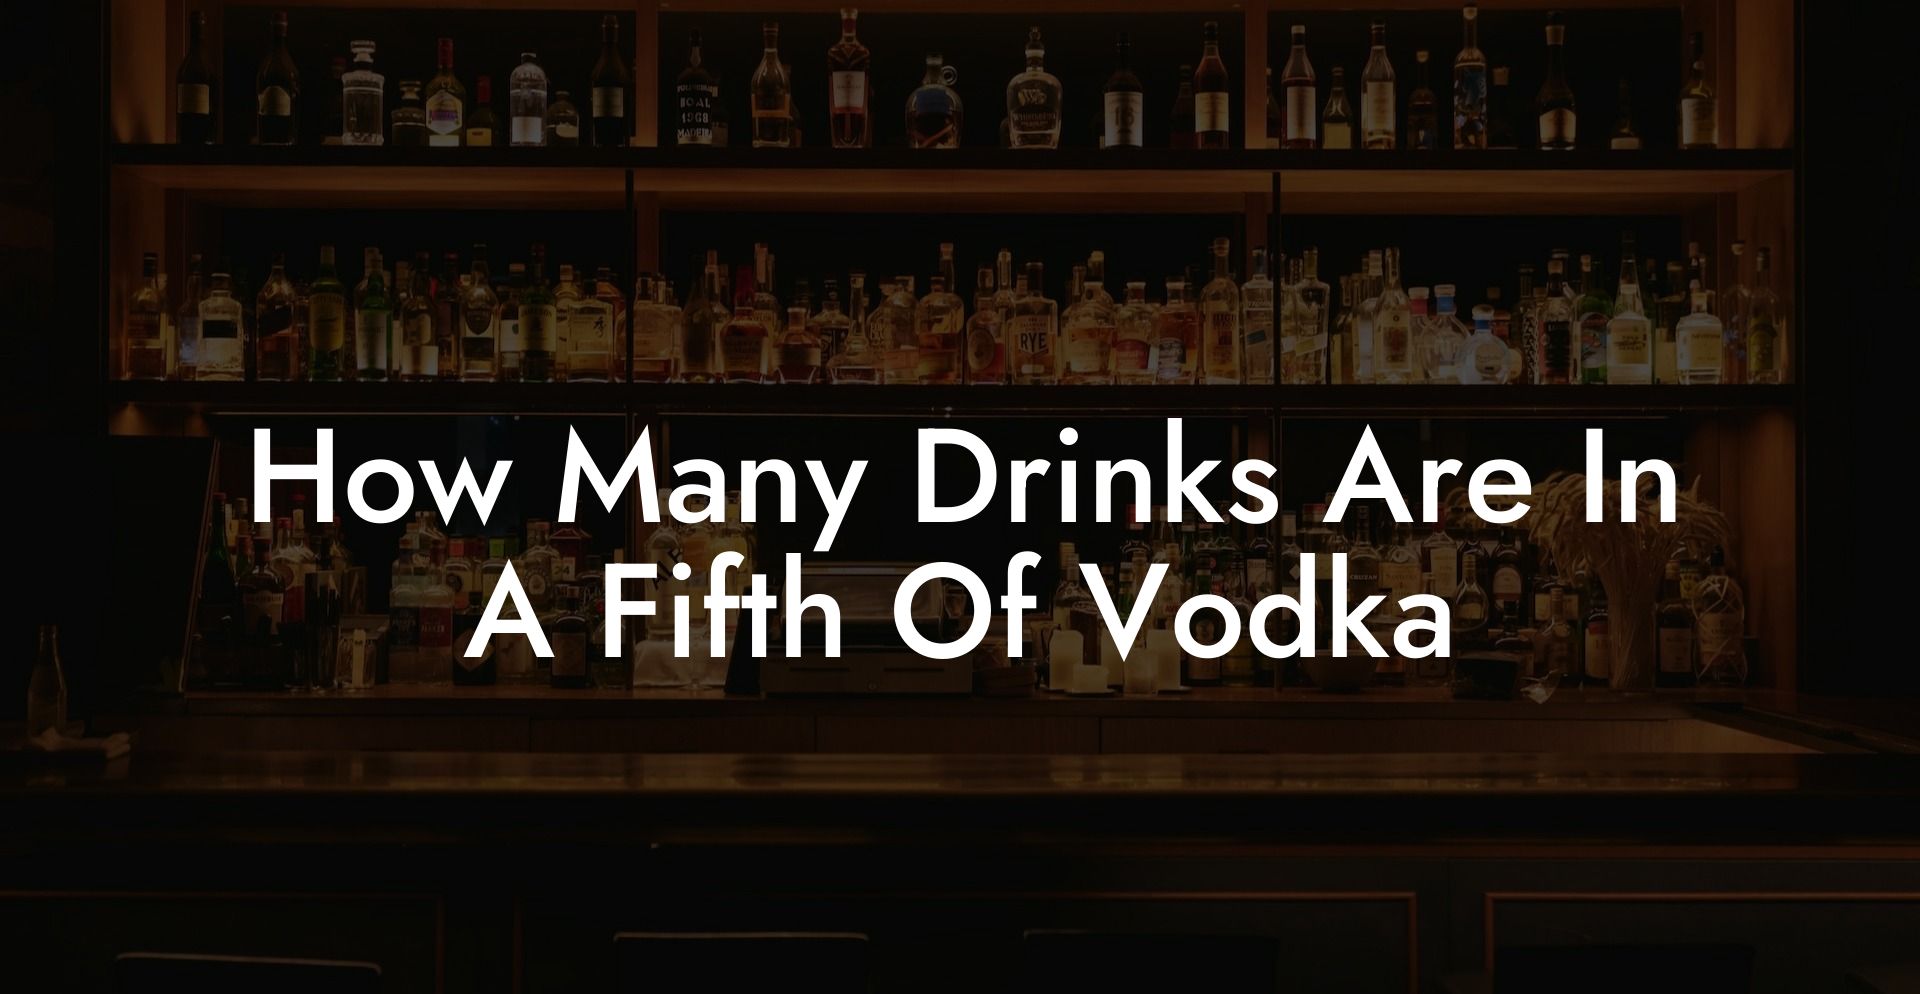 How Many Drinks Are In A Fifth Of Vodka